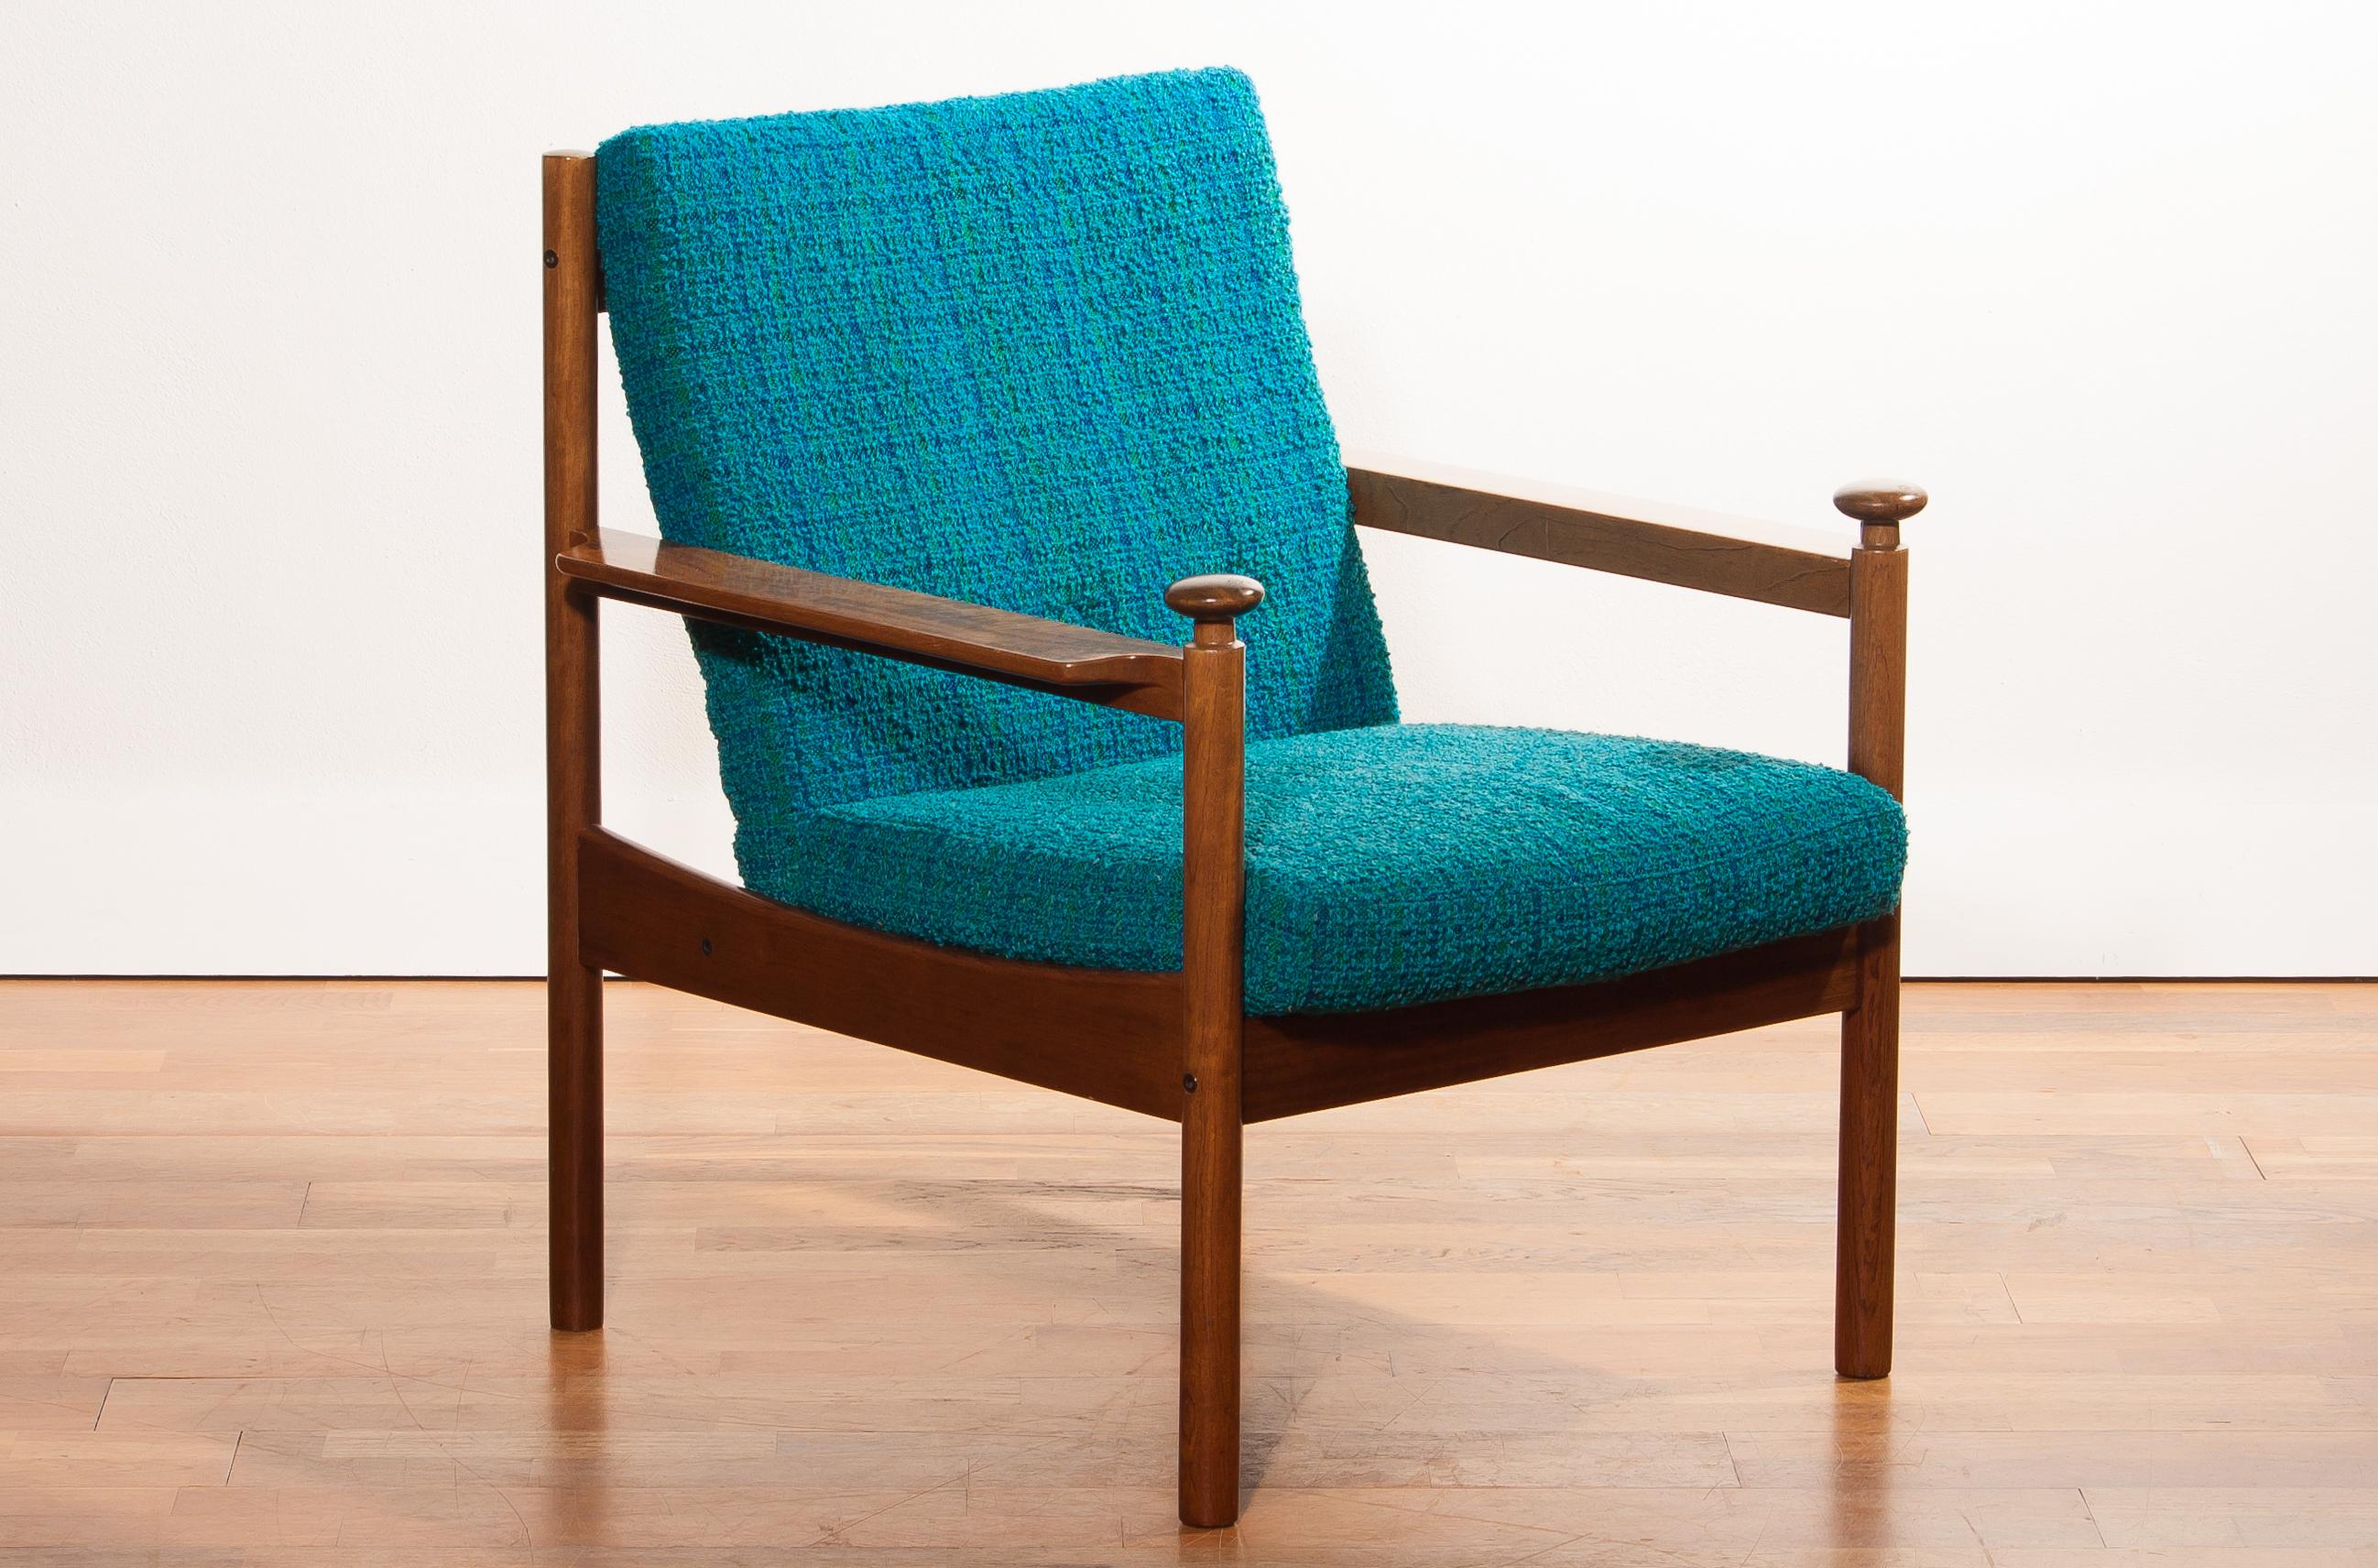 Beautiful chairs designed by Torbjørn Afdal for Sandvik & Co Mobler, Norway.
The wooden frame with the blue fabric cushions makes it a very nice combination.
Period 1950s
Dimensions: H 83 cm, W 70 cm, D 71 cm, SH 40 cm.